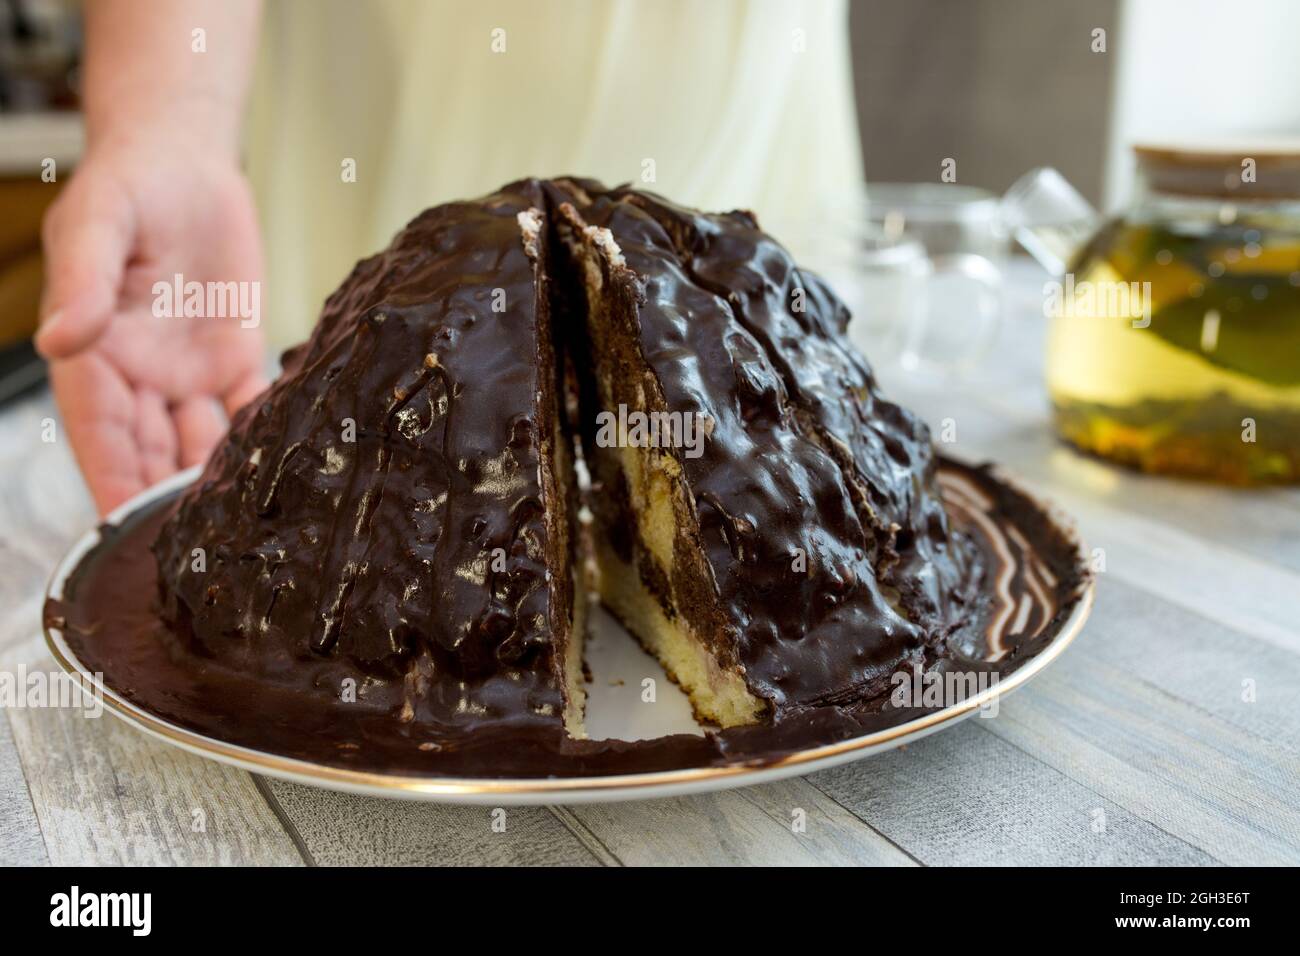 A woman cuts a chocolate cake with a sharp large knife. Tea drinking with homemade sweets. Stock Photo